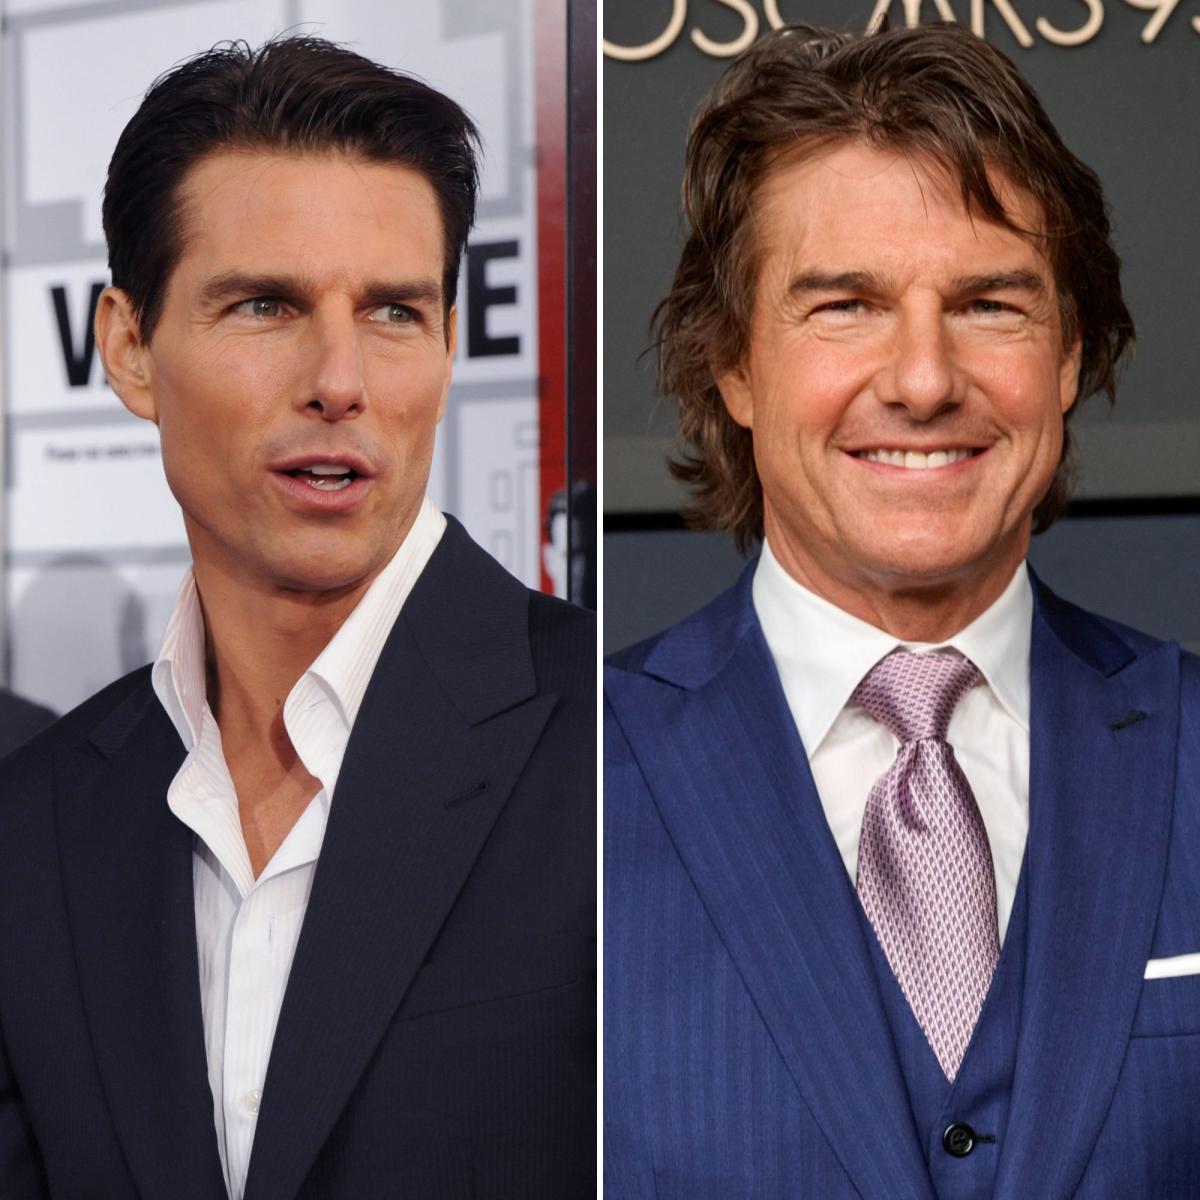 age of tom cruise now